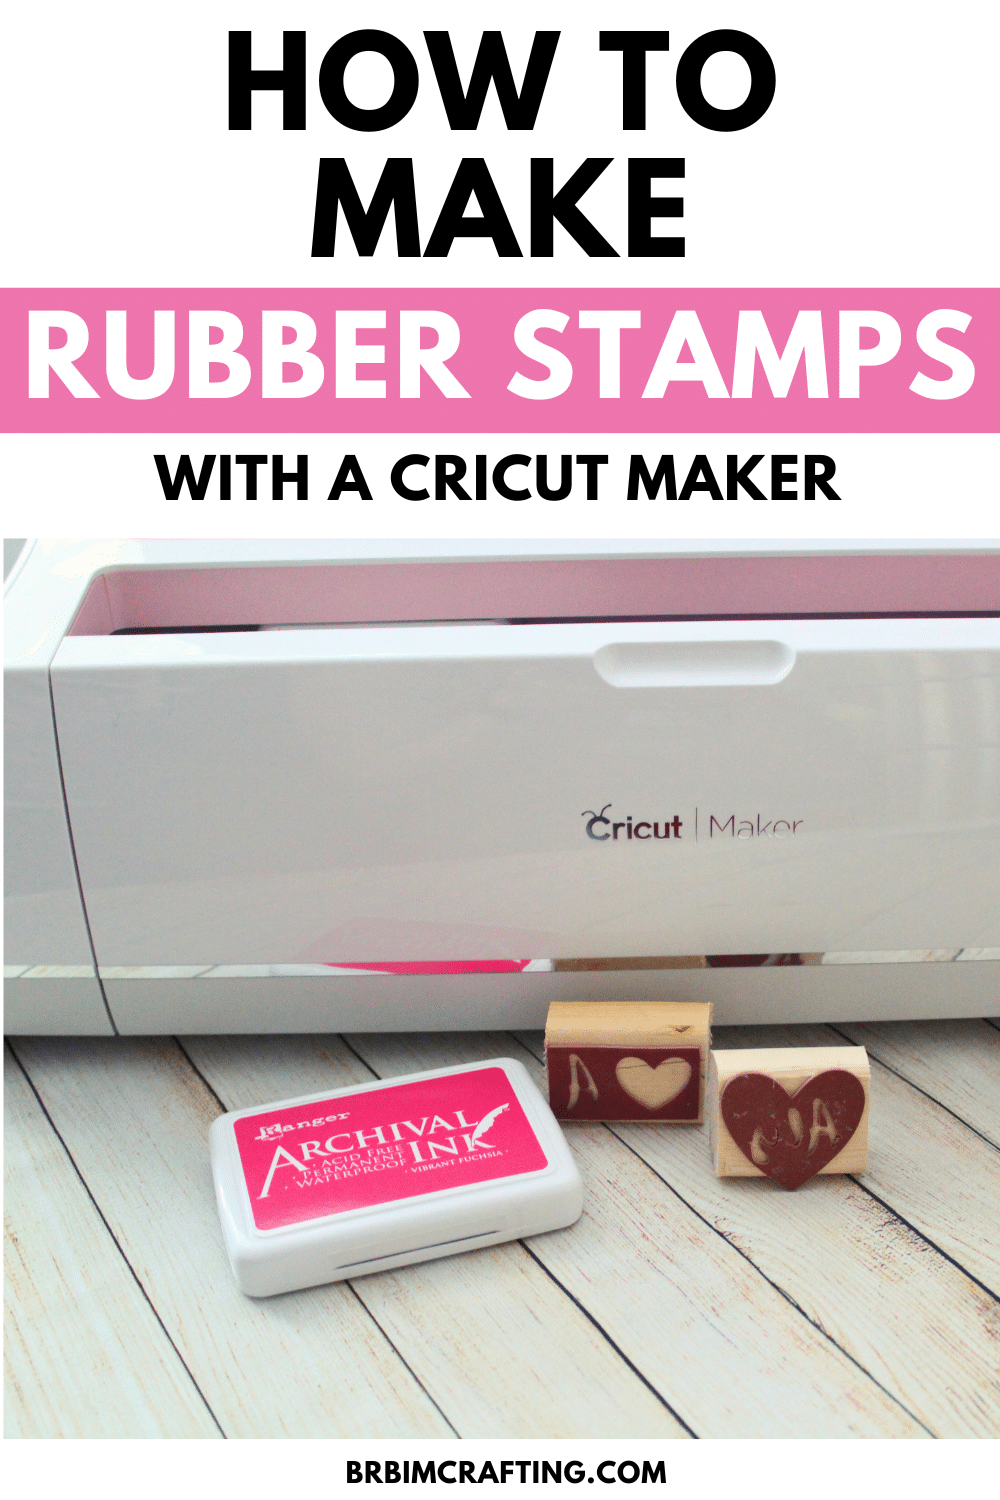 How to Make Rubber Stamps with cricut maker